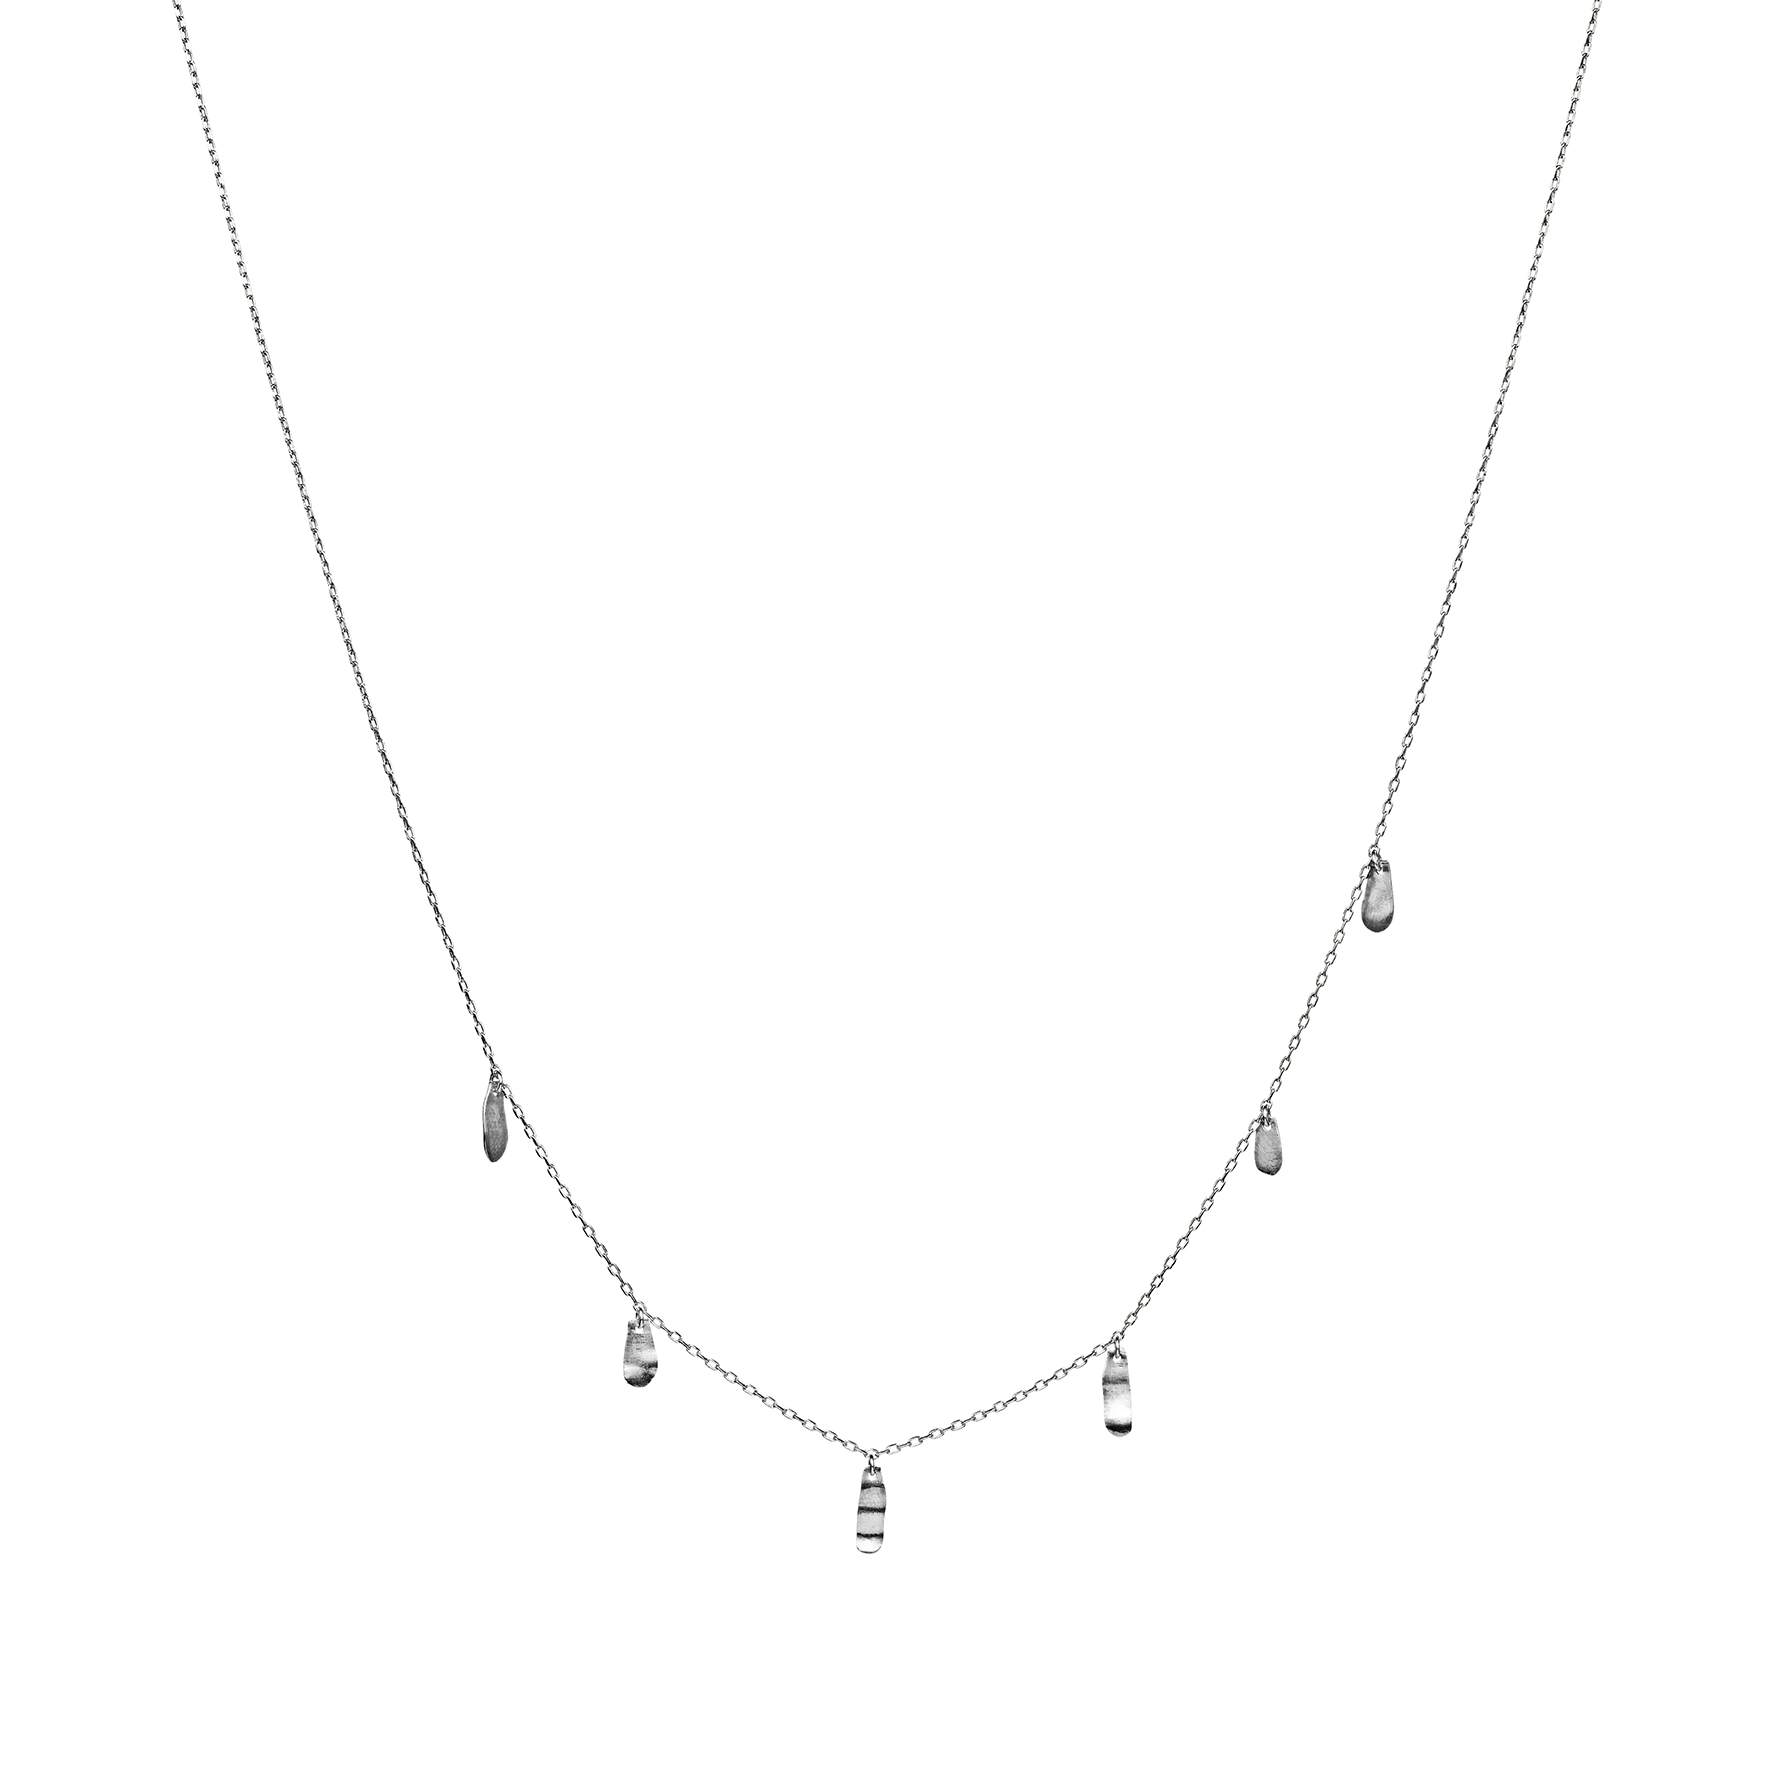 Columbine Necklace from Maanesten in Silver Sterling 925